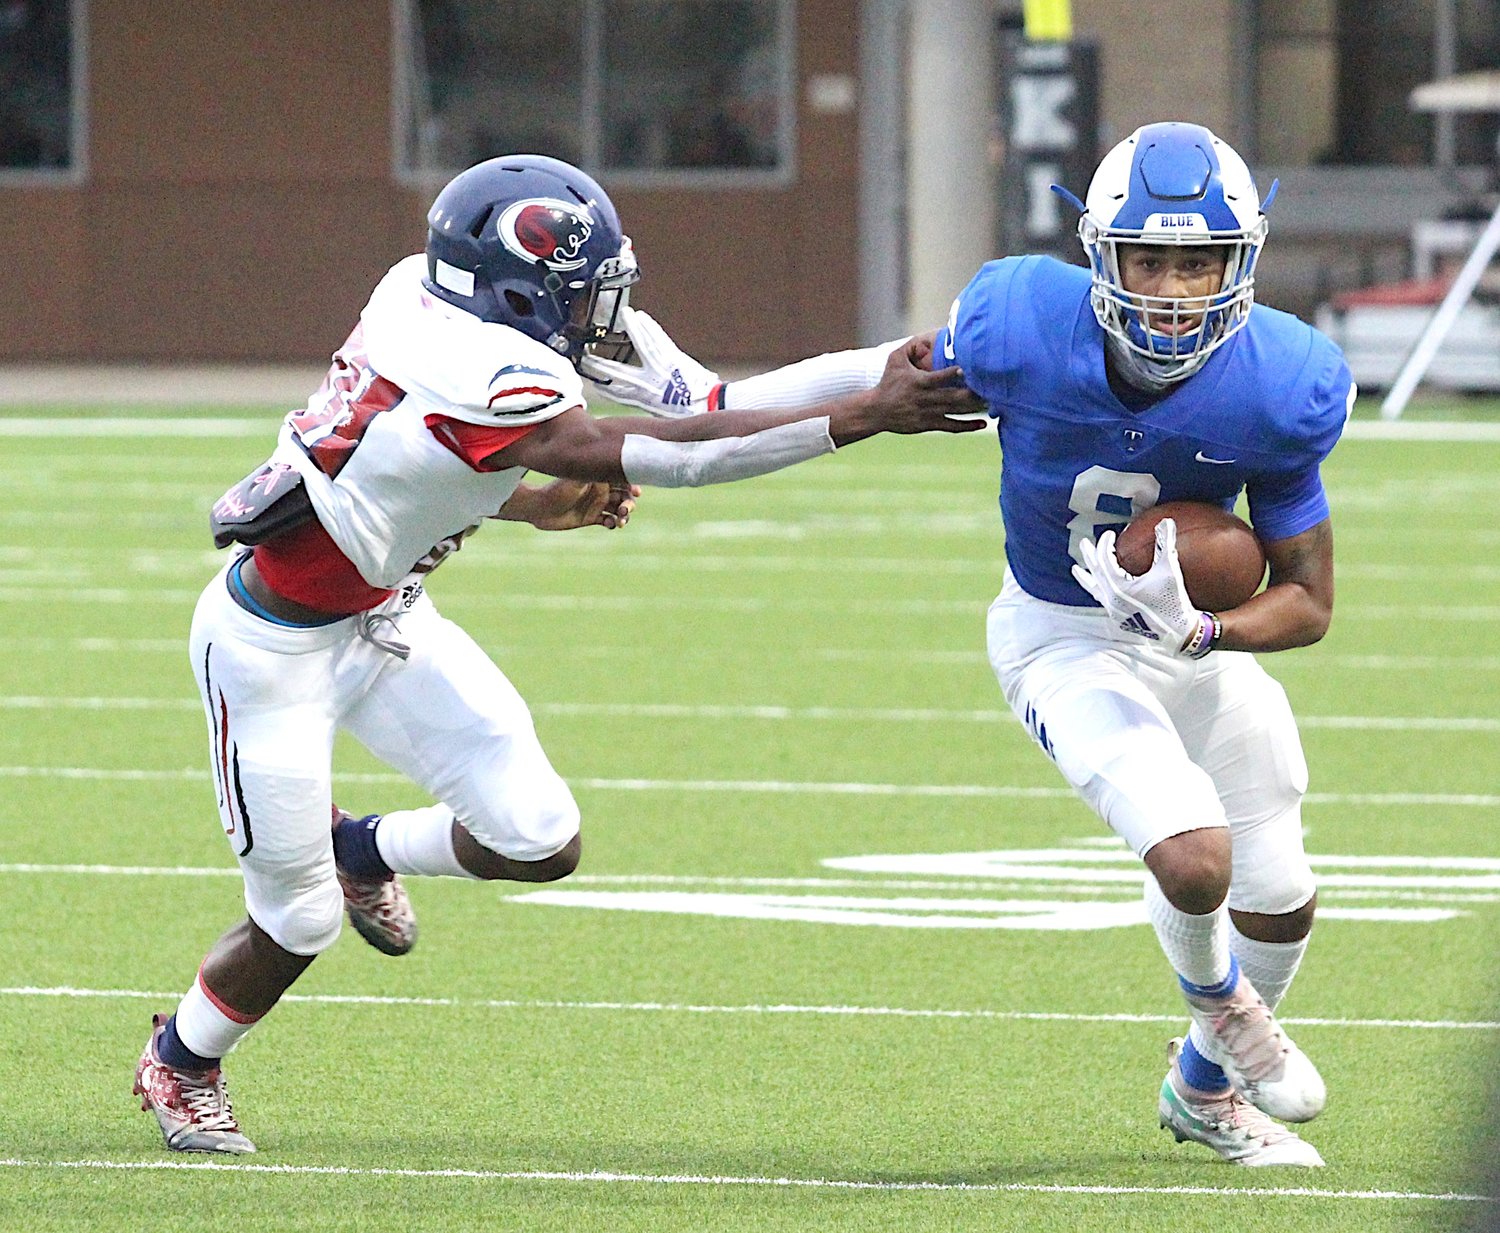 Taylor senior receiver Tyrone Irving III makes a catch-and-run during the Mustangs' win over Cy-Springs on Sept. 24 at Legacy Stadium.